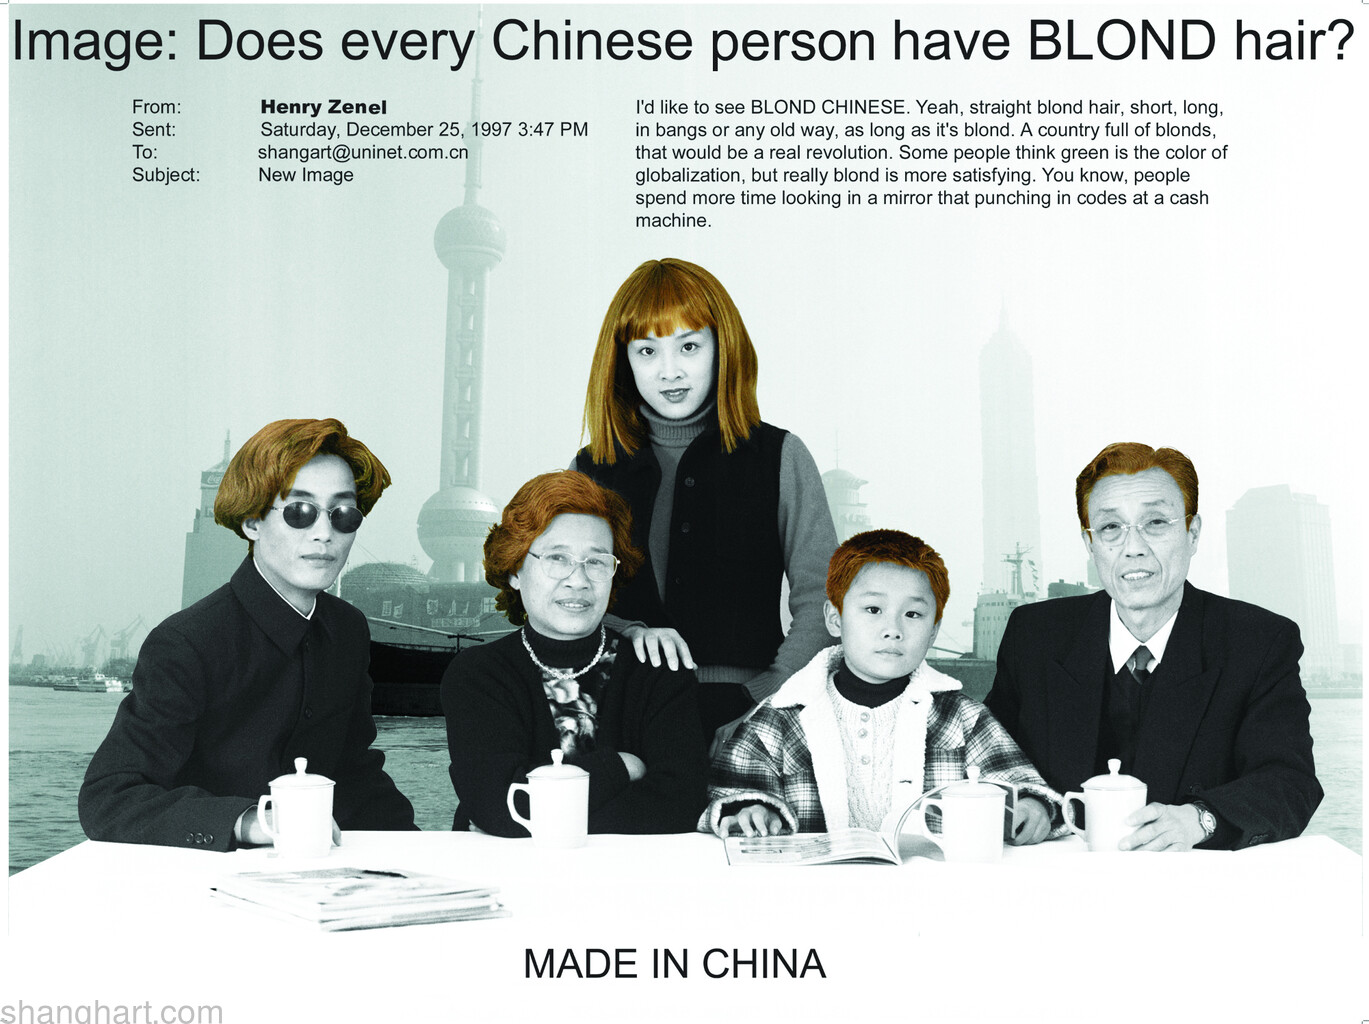 Imagine Does Every Chinese Person Have Blond Hair